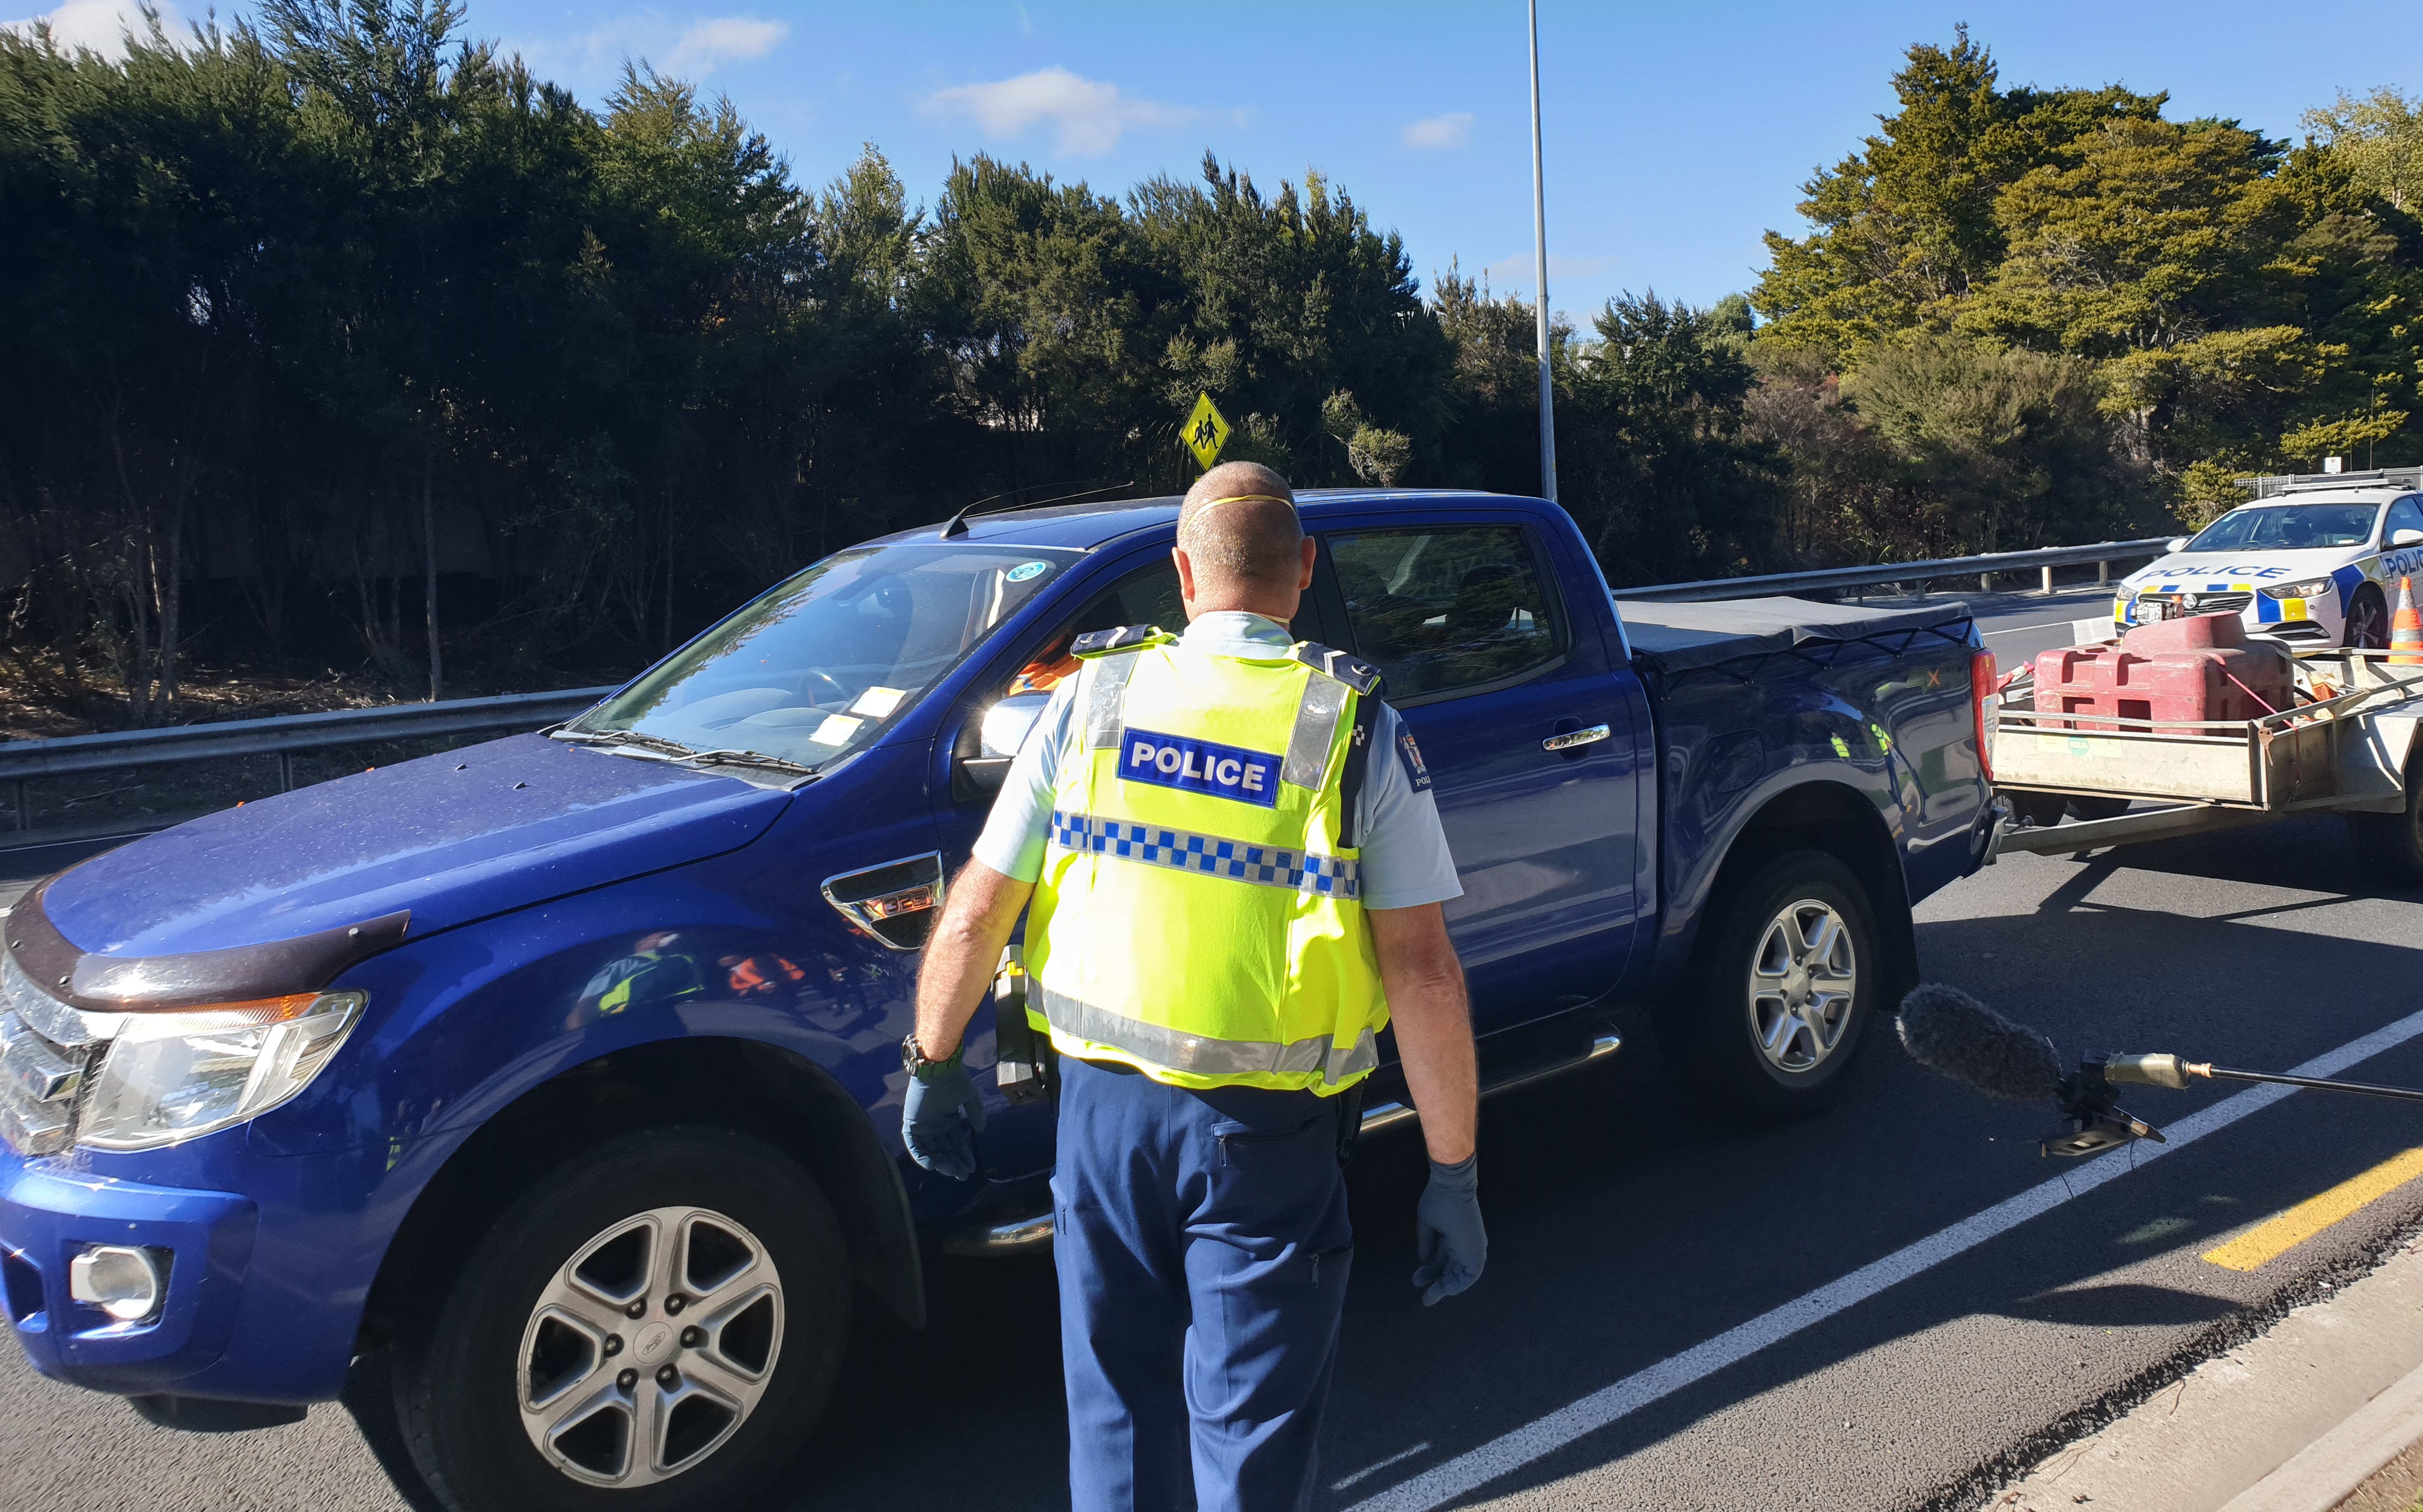 Police checkpoint on SH1 in Warkworth, north of Auckland